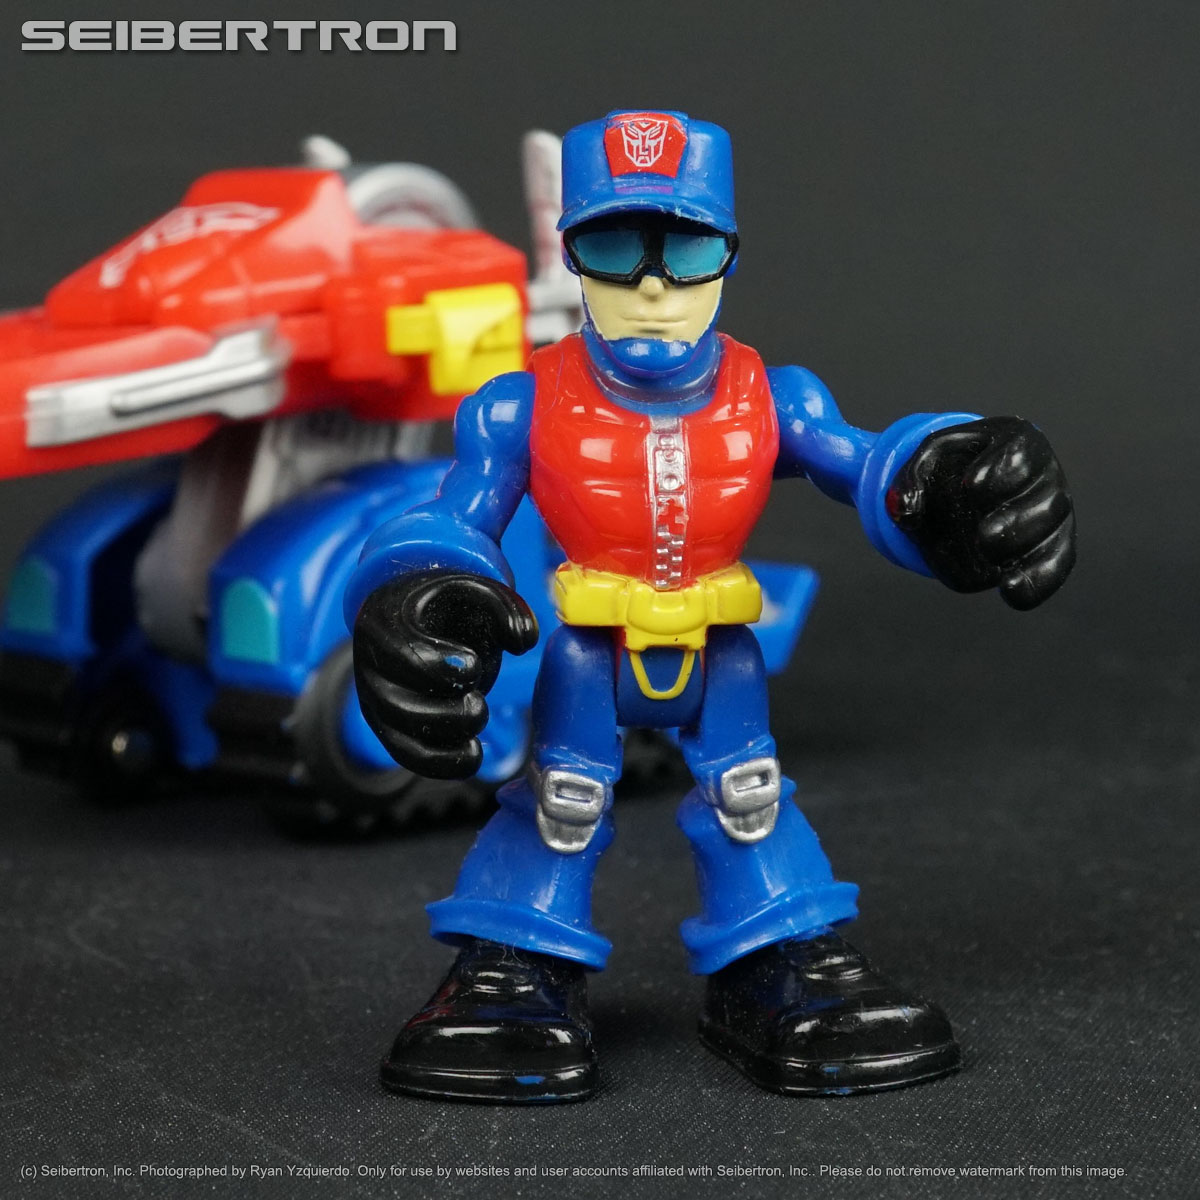 Transformers, Masters of the Universe, Teenage Mutant Ninja Turtles, Gobots, Comic Books, Shopkins, and other listings from Seibertron.com: CHIEF CHARLIE BURNS + RESCUE CUTTER Transformers Rescue Bots 2011 Playskool